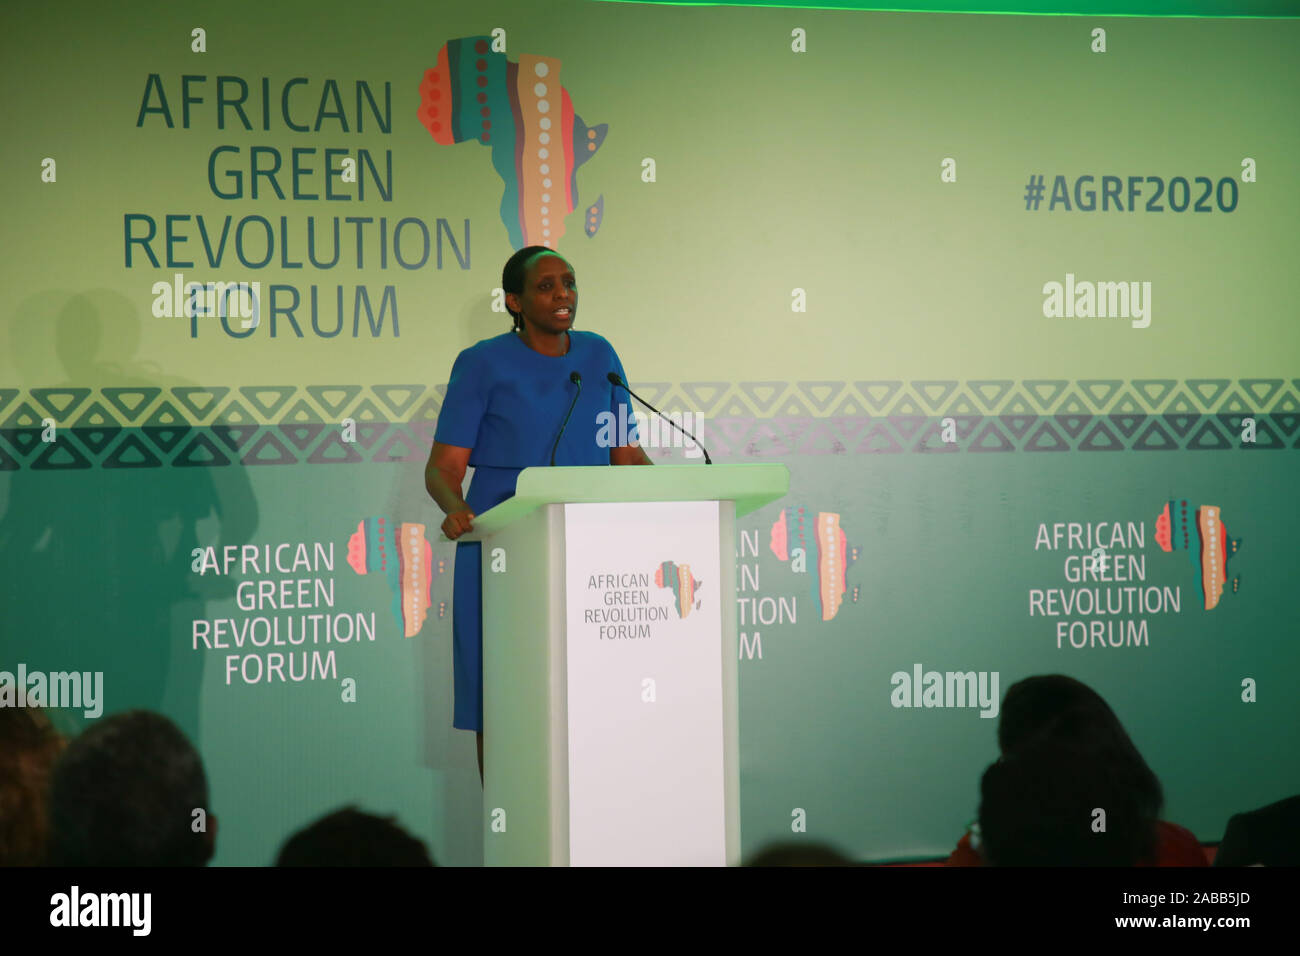 Kigali, Rwanda. 26th Nov, 2019. Agnes Kalibata, president of Alliance for a Green Revolution in Africa (AGRA), delivers remarks at an event to launch the African Green Revolution Forum (AGRF) 2020 Summit in Kigali, capital city of Rwanda, Nov. 26, 2019. New apporaches were emphazized on Monday in Rwanda's Kigali to address 'rising' cases of hunger and food insecurity challenges in Africa. Credit: Lyu Tianran/Xinhua/Alamy Live News Stock Photo